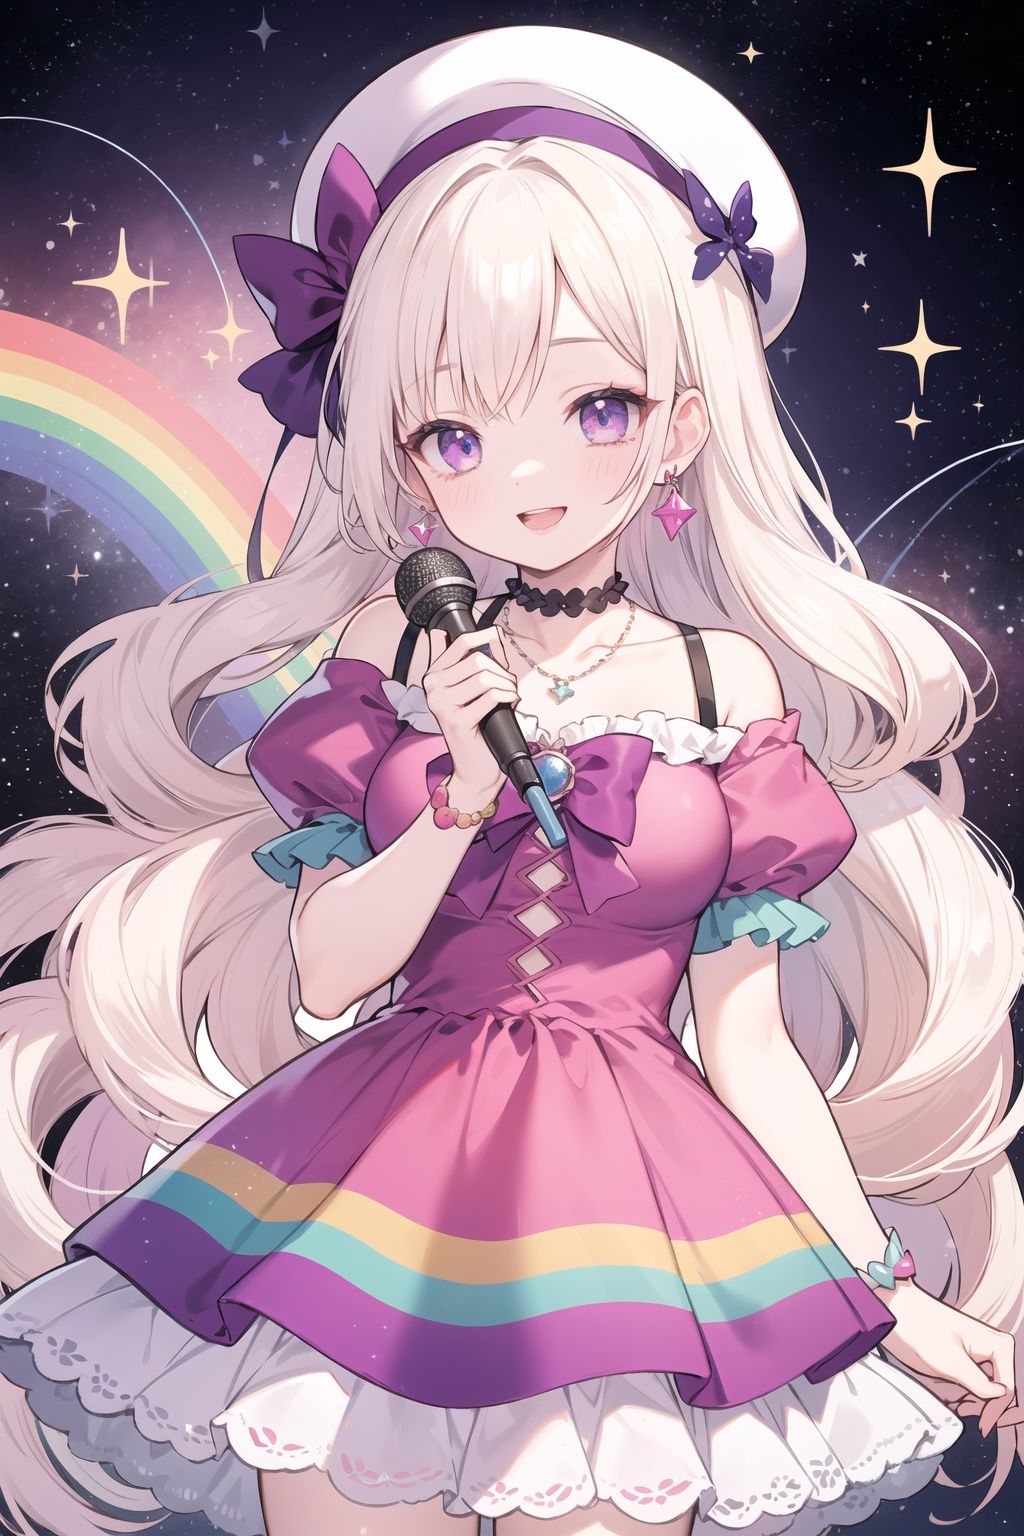 Microphone in hand,Masterpiece,absurdres,best quality,highest quality,highly detailed,1girl,solo,drop dead gorgeous woman,ulzzang,vibrant,sublime,colorful,iridescent colors,laughing,giggling,long dark eyelashes,large eye highlights,highlighted cheeks,glittery pink glossy lips,shiny earrings,necklace,multicolored,rainbow flare,Galaxy,bokeh,in the style of Lisa Frank,choker,+++++,white hair,earrings,galaxy hair,very long wavy hair,,magical girl,purple eyes,pink headwear,pink bow,Space Dress,Galaxy  Dress,